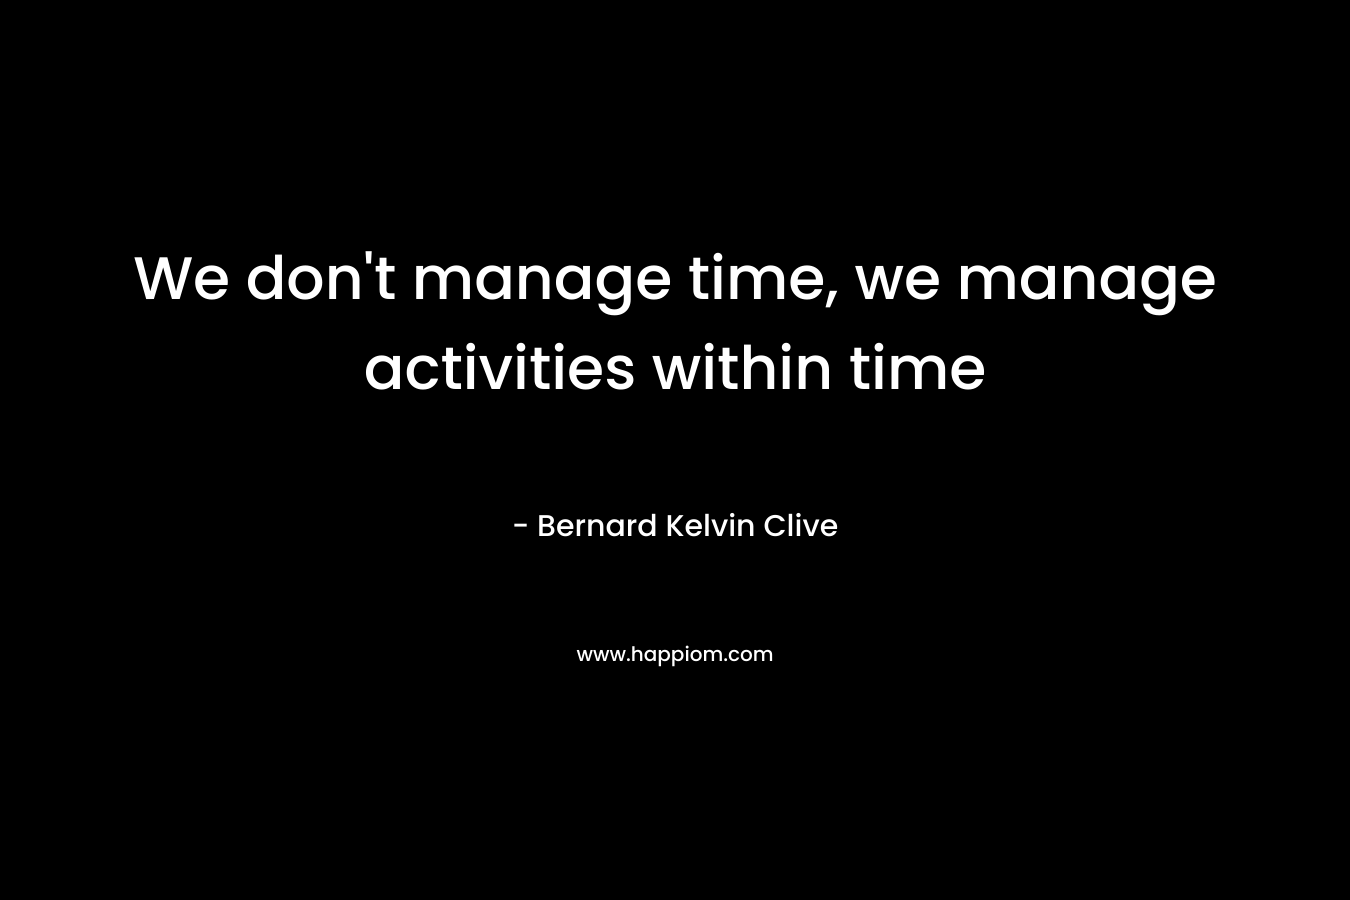 We don't manage time, we manage activities within time